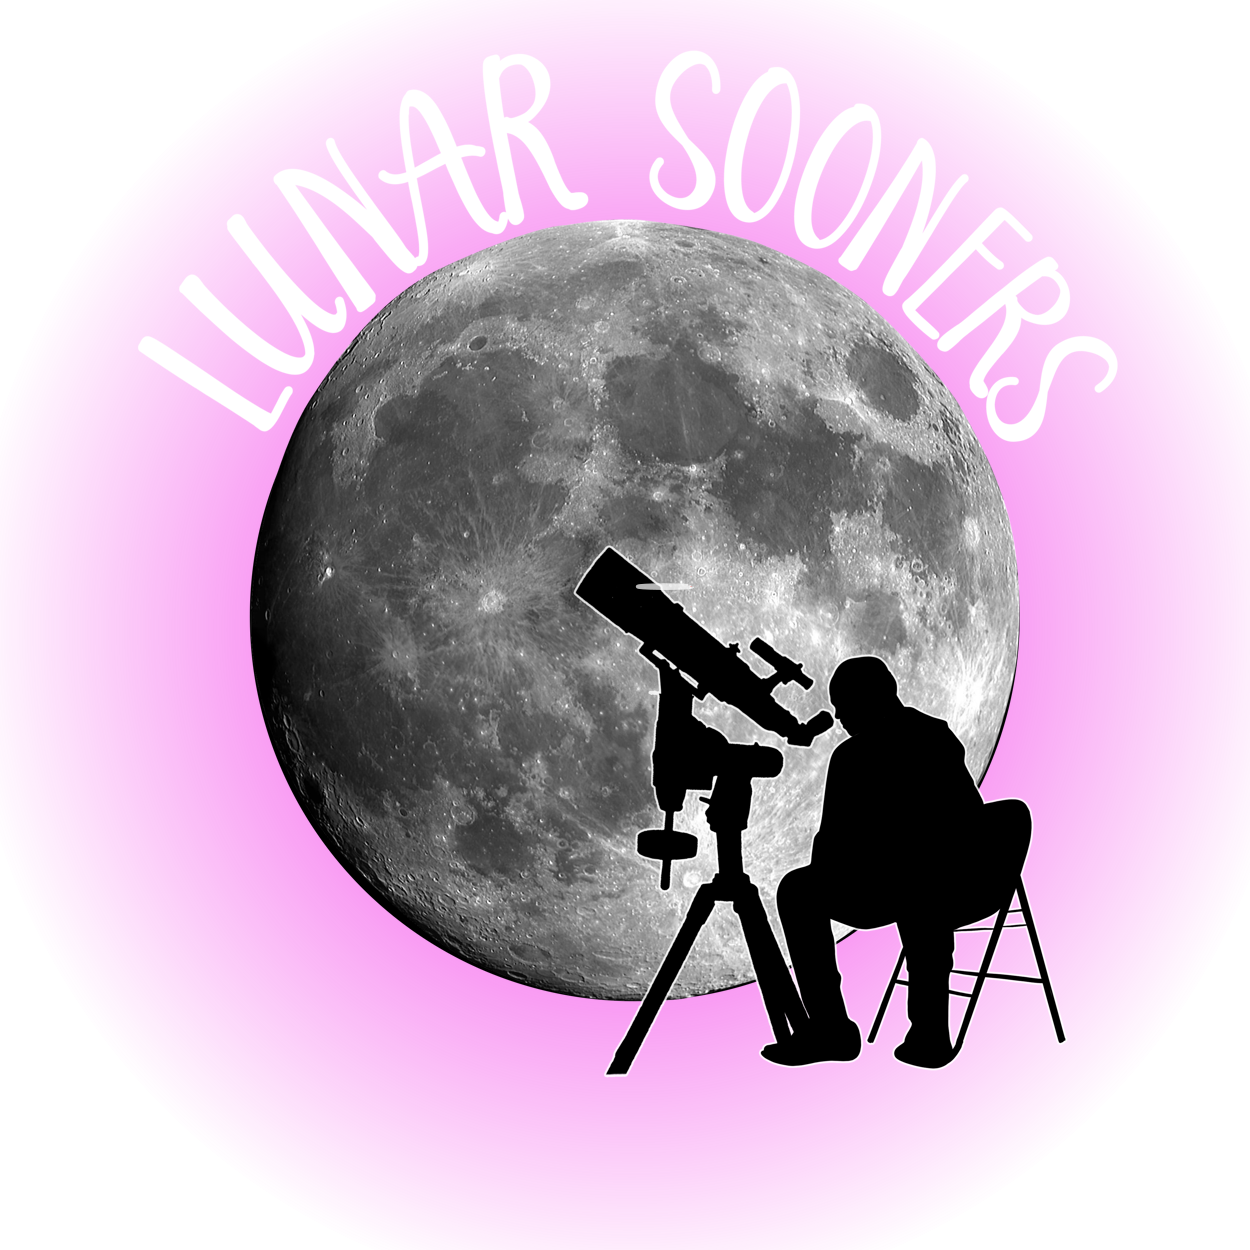 Image of the moon against a purple background with "Lunar Sooners" written above. A silhouette of a person sitting at a telescope is in front of the moon.